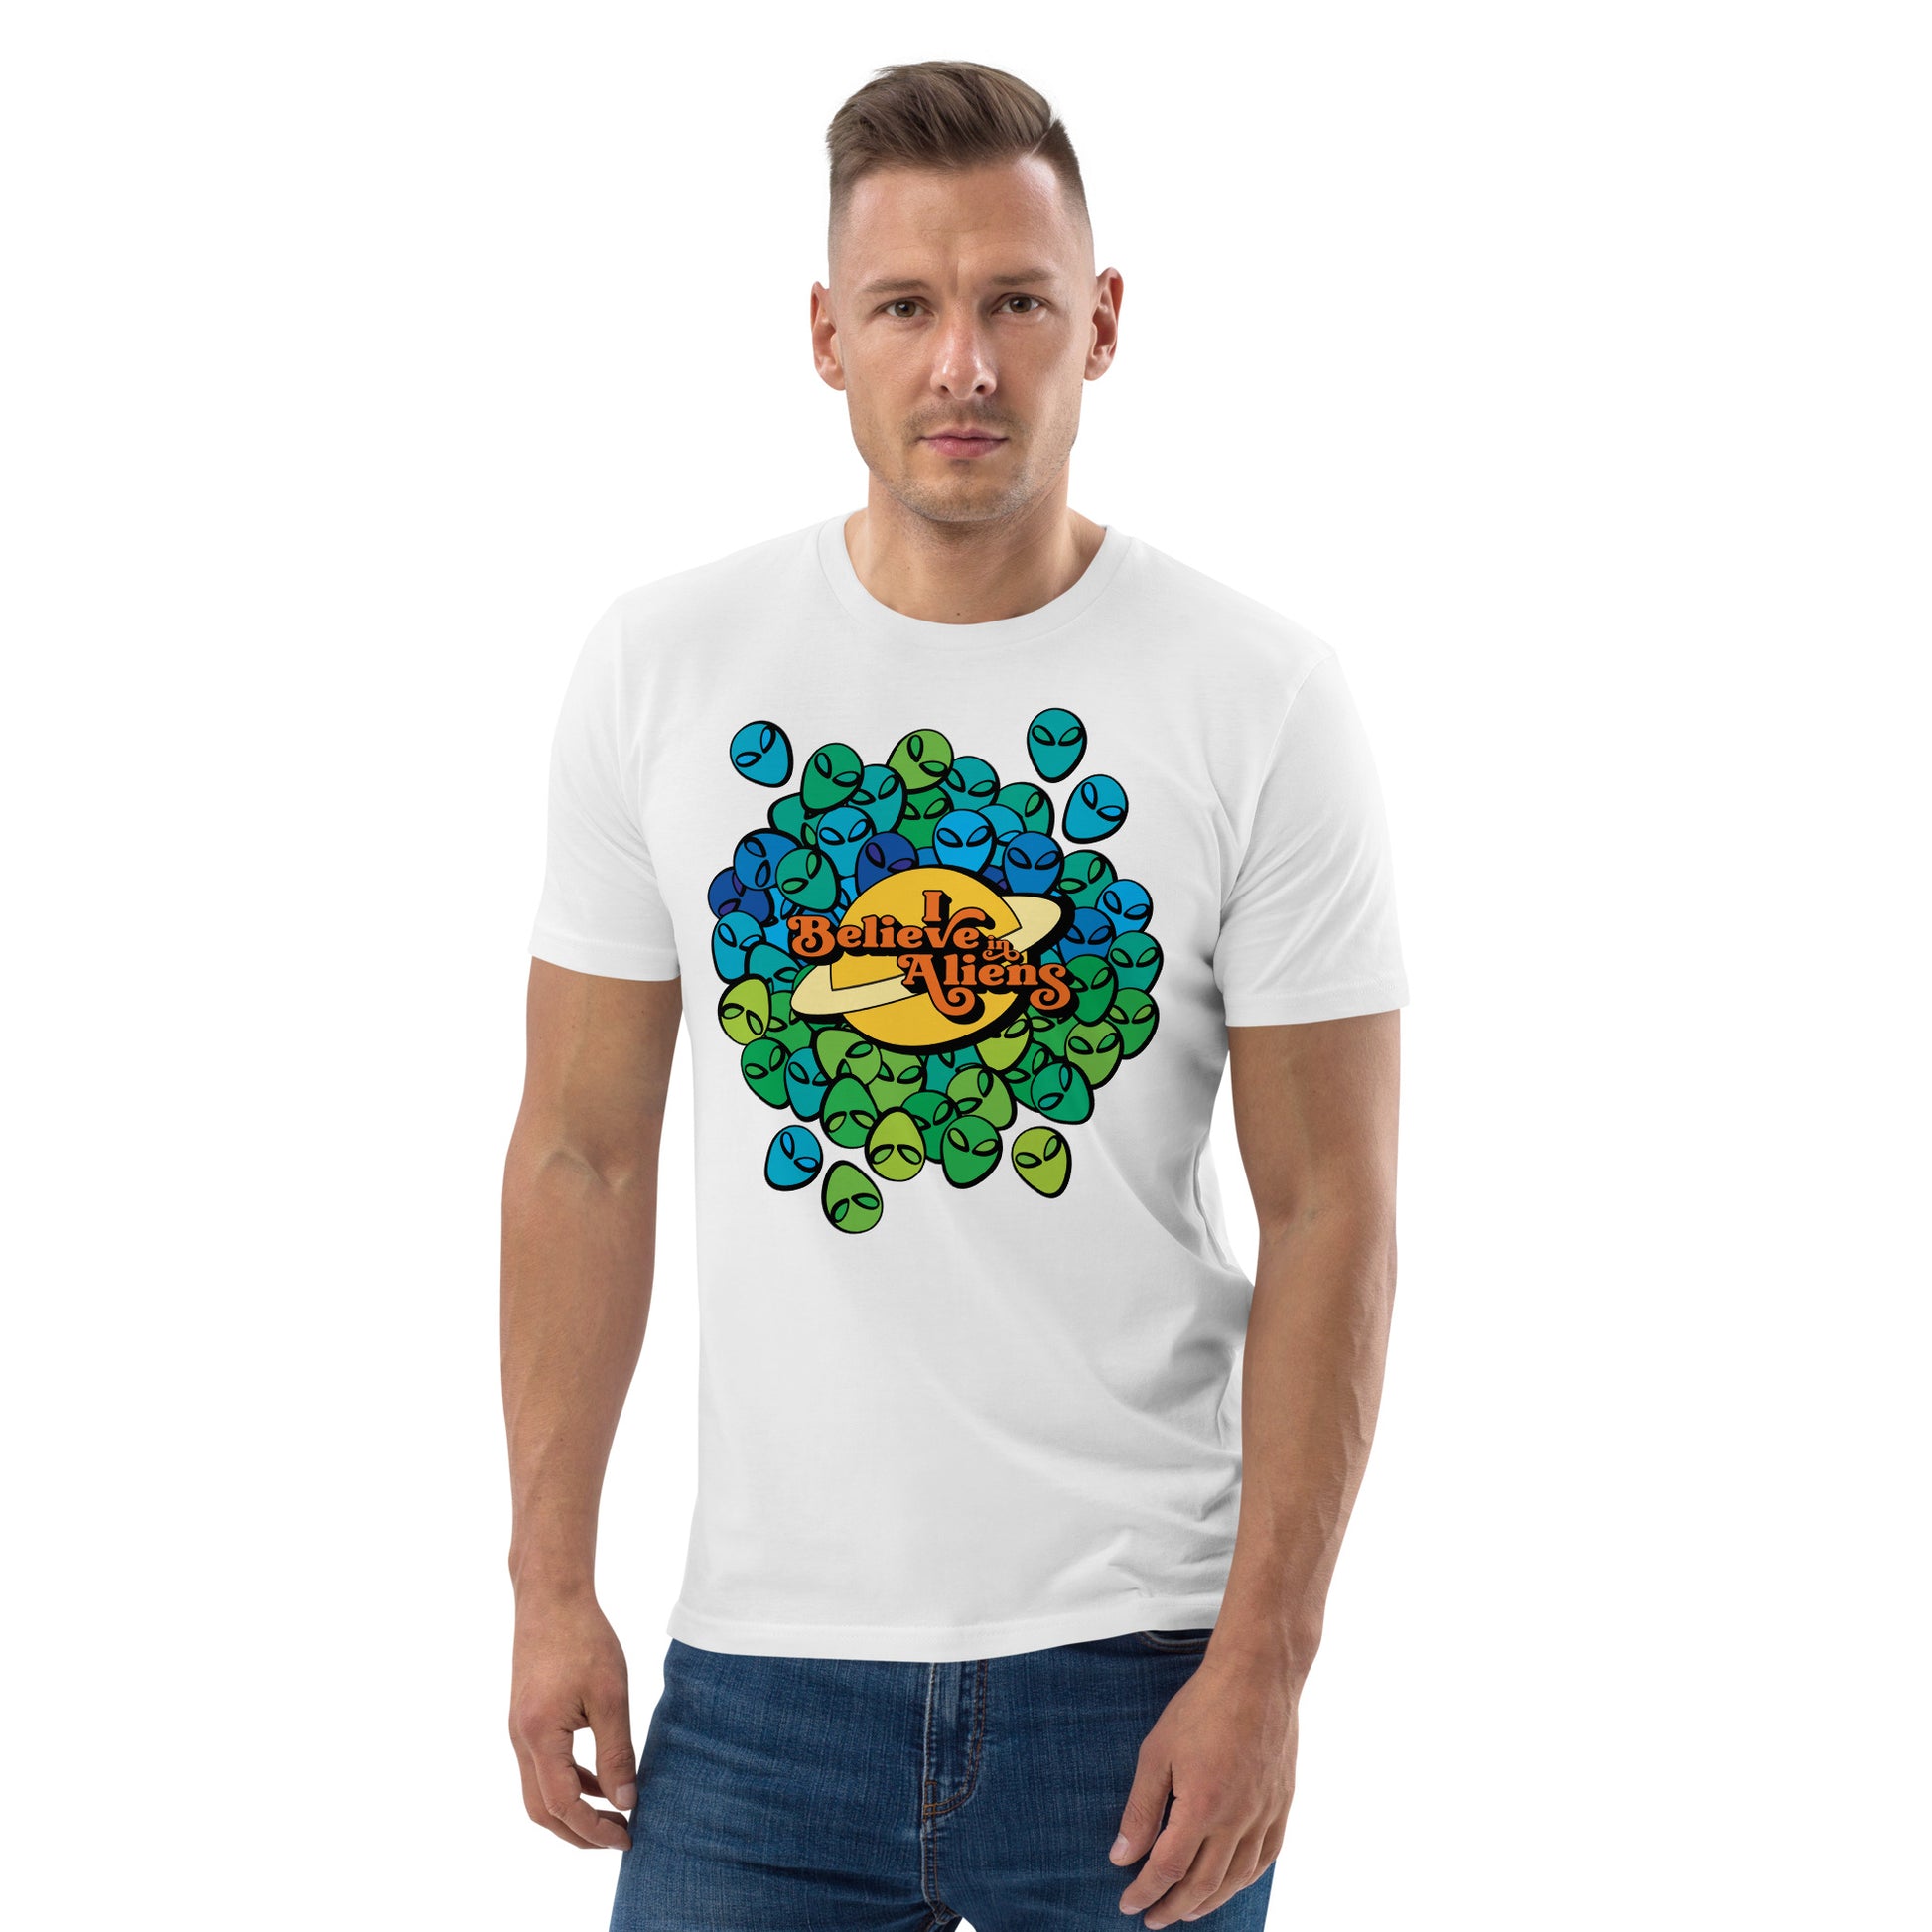 #WEIRDO | Funny t shirt man with Aliens. This white organic t shirt for men also has or funny meme printed on top of the alien explosion: I believe in Aliens. Check out more funny weird shirts in our online giftstore for weirdos.